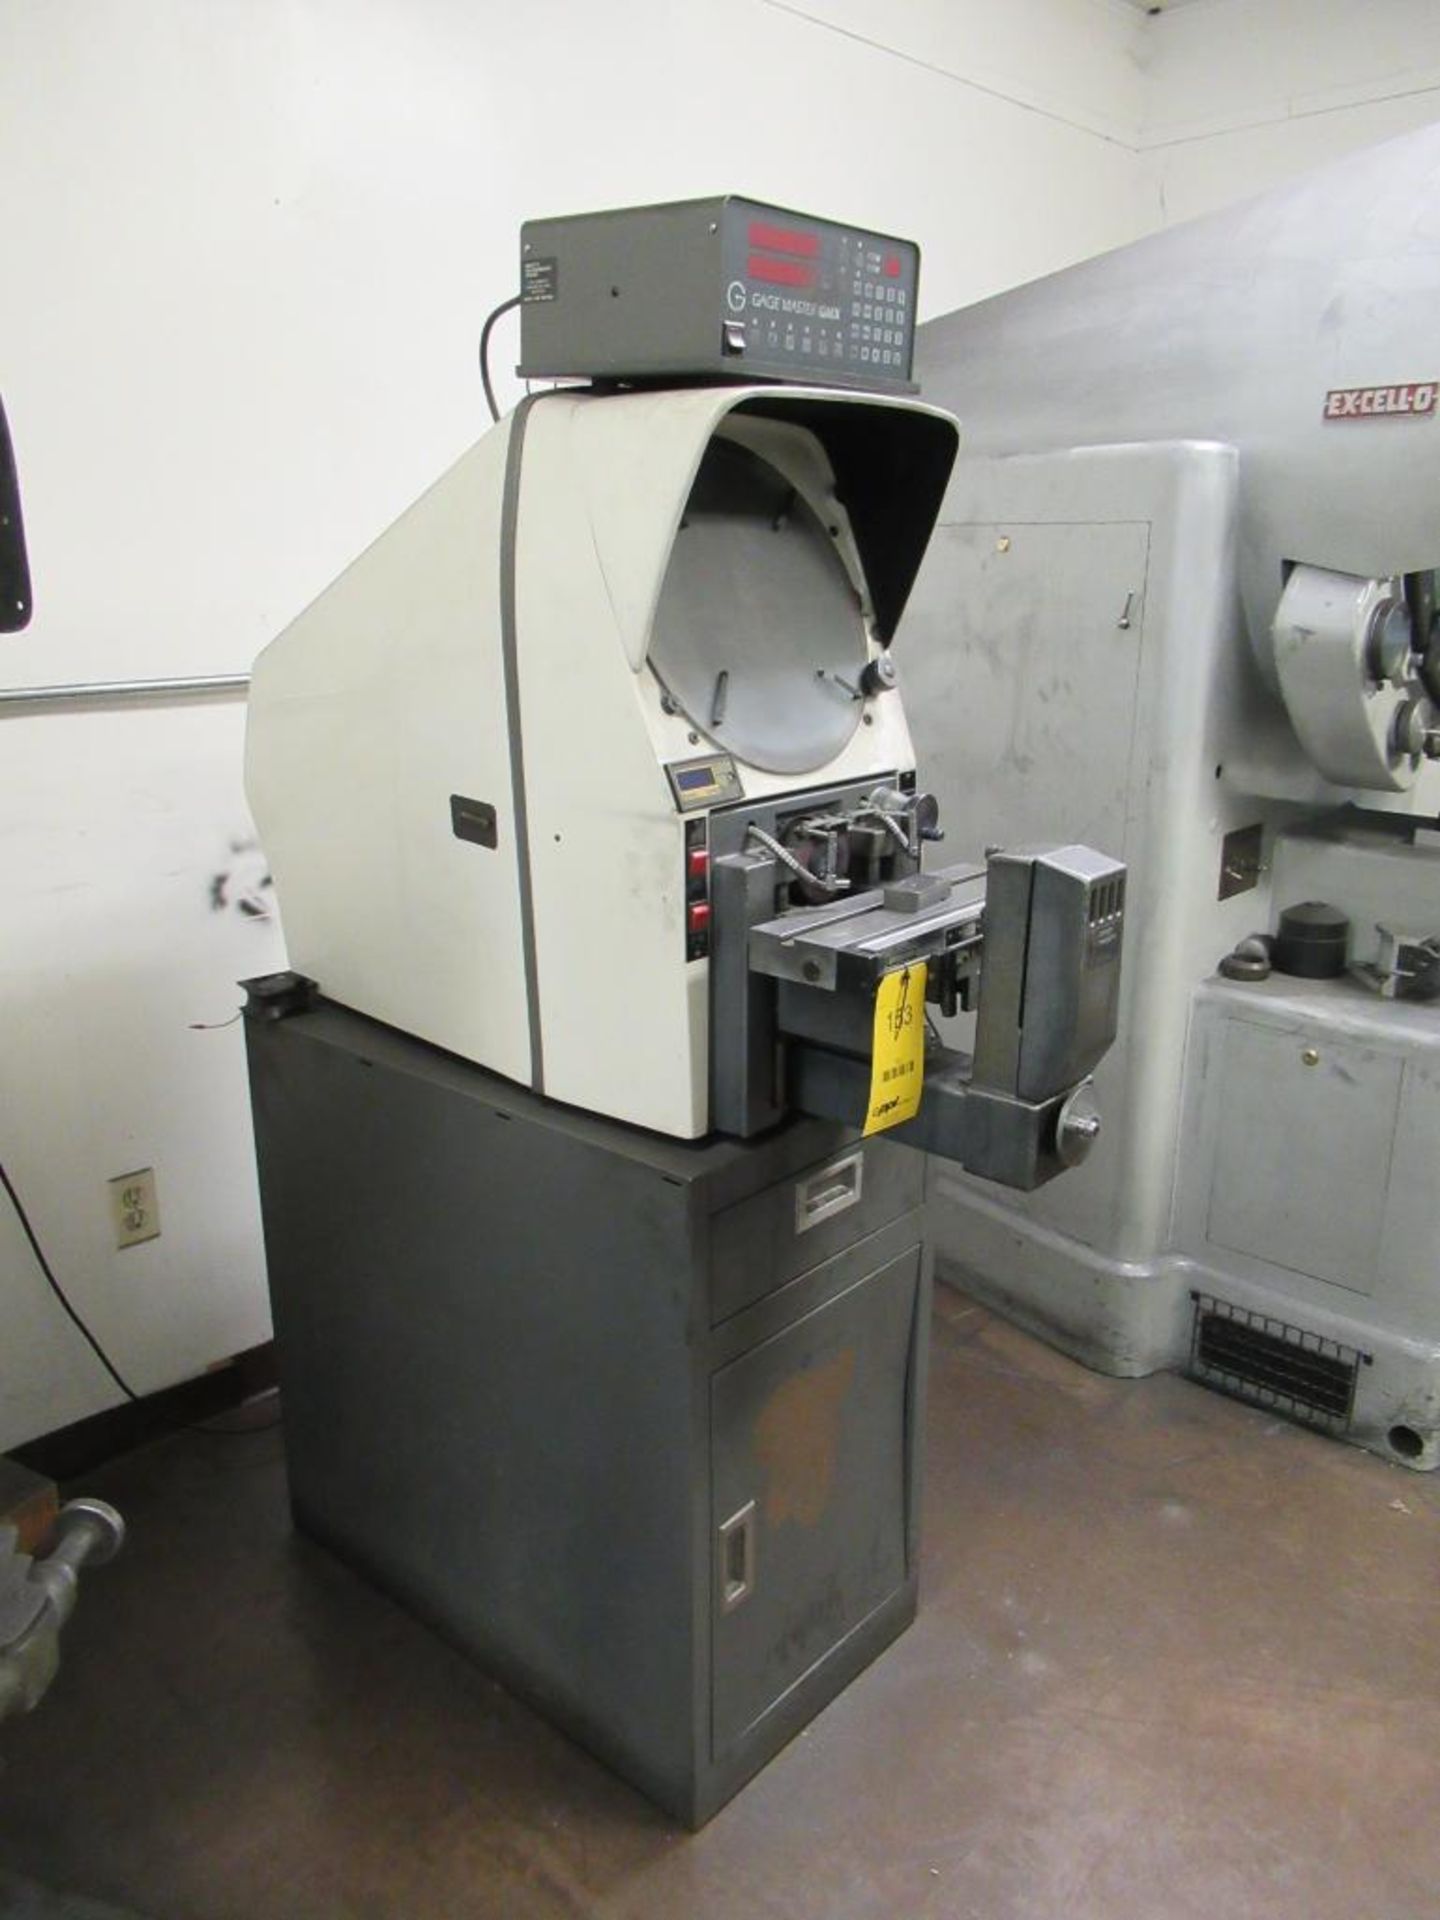 Gage Master Optical Comparator, Model 29/GMXIFS, S/N 145813689, 14" Screen - Image 5 of 7